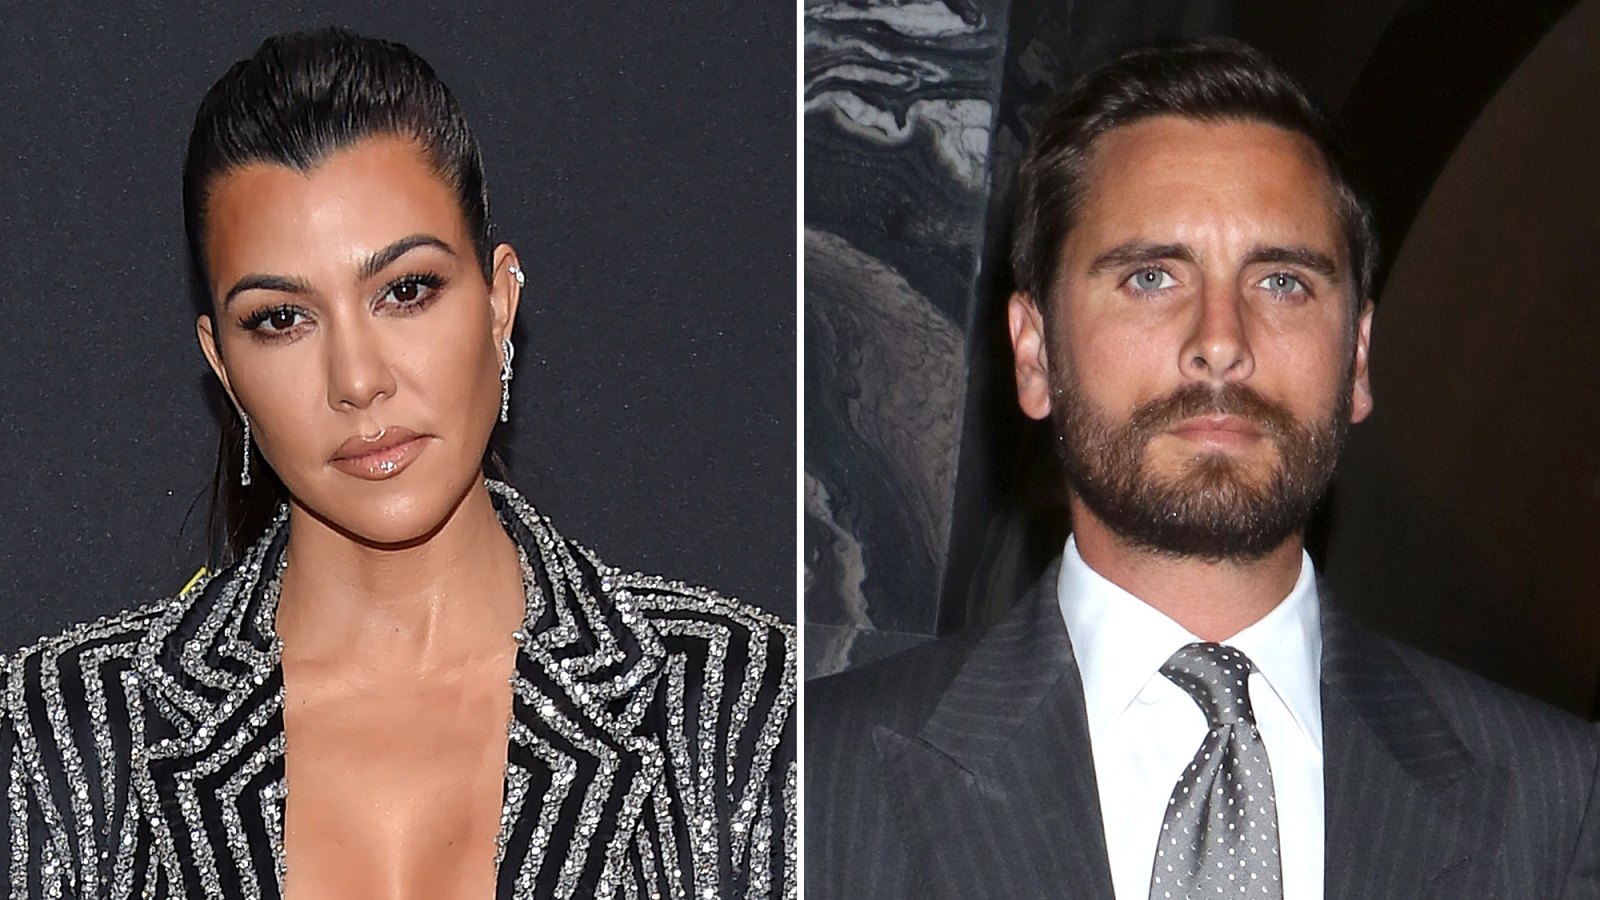 Kourtney Kardashian Defends Ex Scott Disick After Therapy Conversations Are Leaked